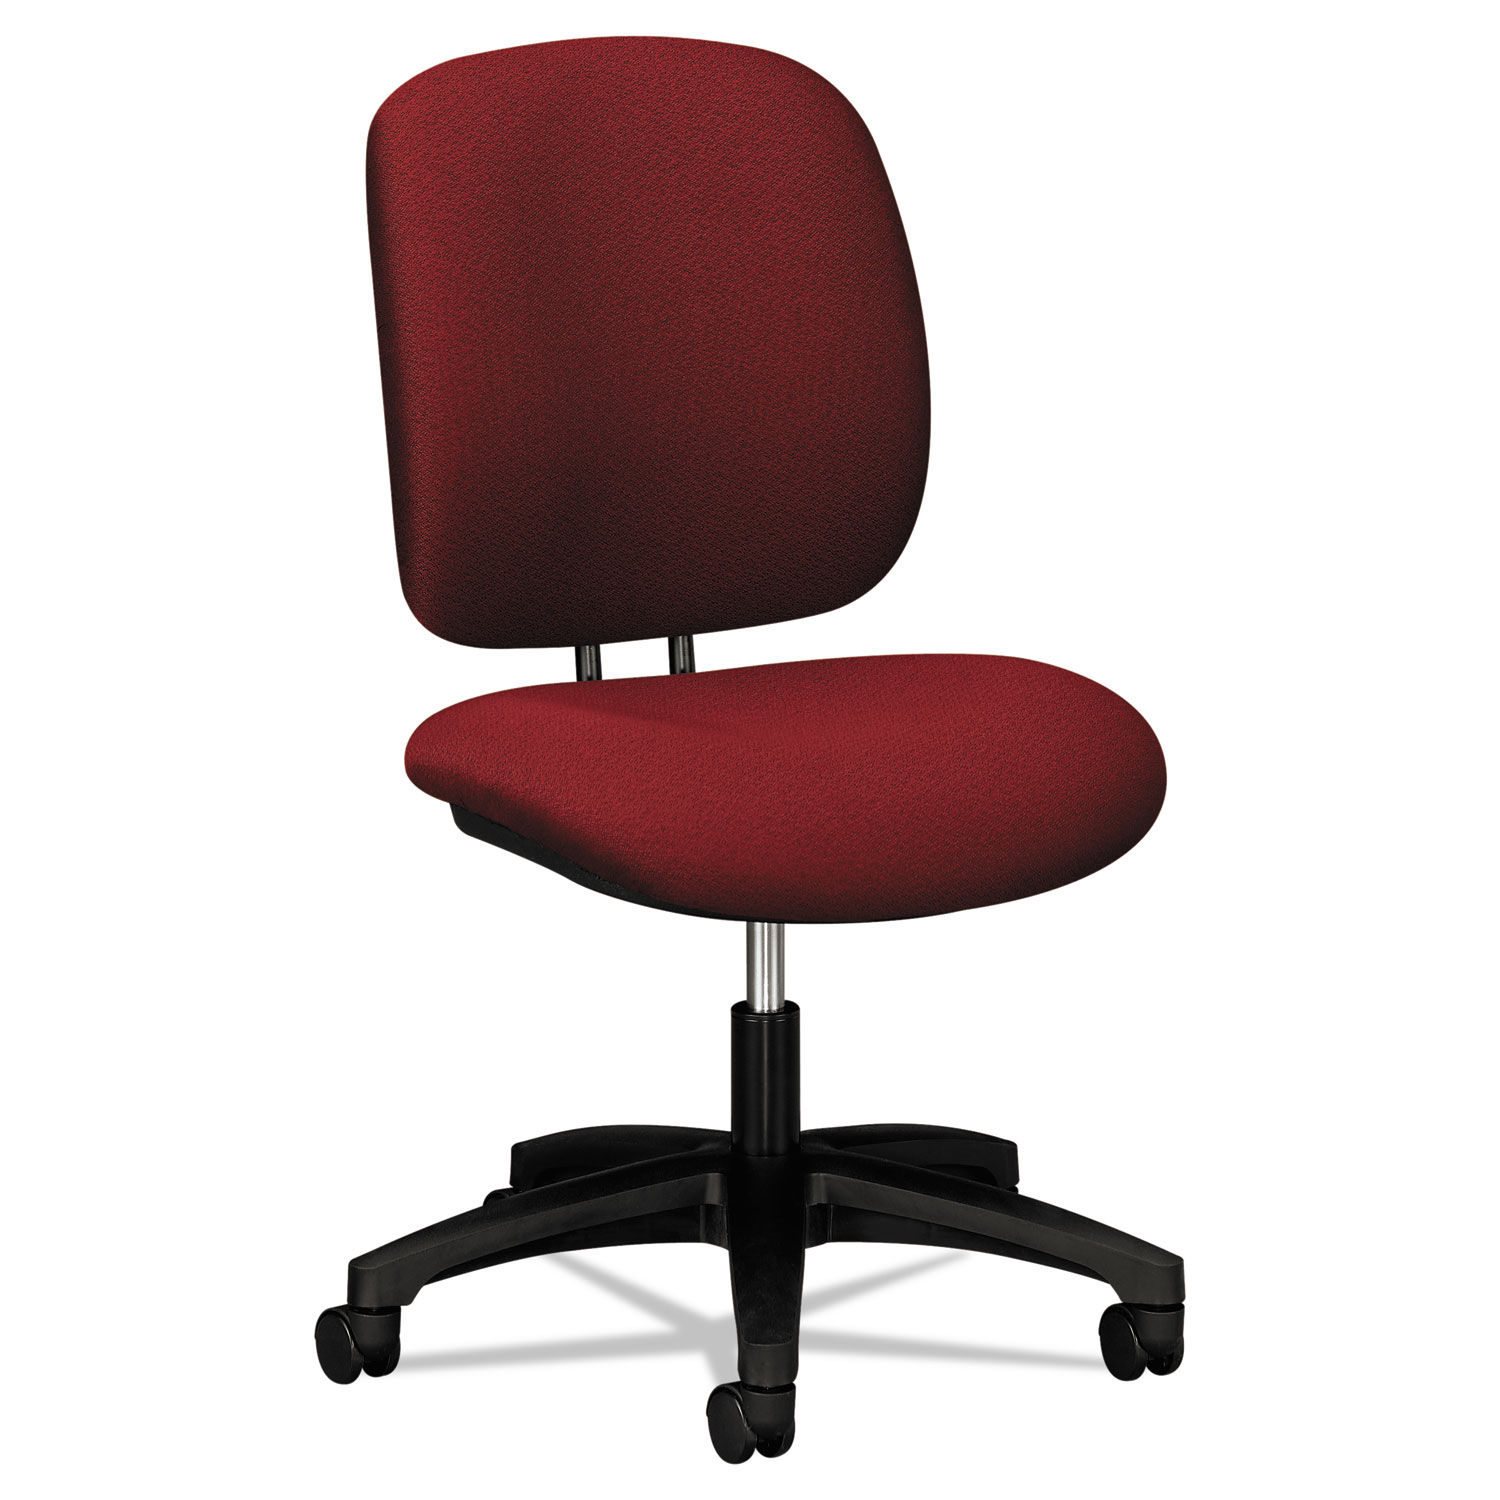 COMFORTASK TASK SWIVEL CHAIR SUPPORTS UP TO 300 LBS., BURGUNDY SEAT, BURGUNDY BACK, BLACK BASE